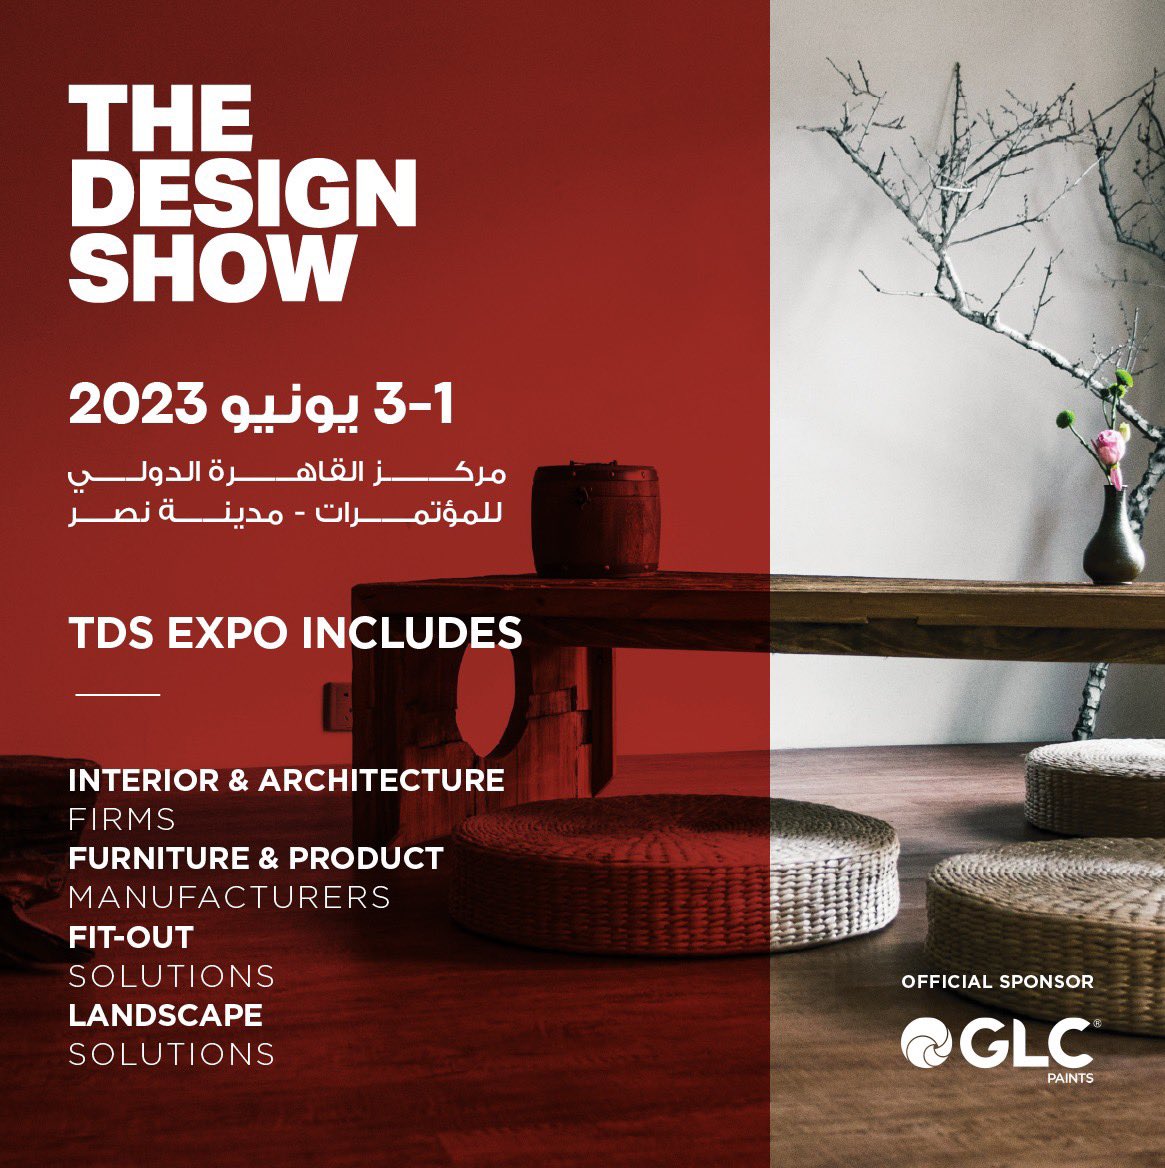 PROJECT OR HOME OWNER? DON'T MISS TDS EXPO

Register Now to get your free invitation: thedesign-show.com/registration-p…

#design #TDS #manufacturingmeetsdesign #productdevelopment #architecture #landscape #interior_design #homedecoration #FitoutSolutions